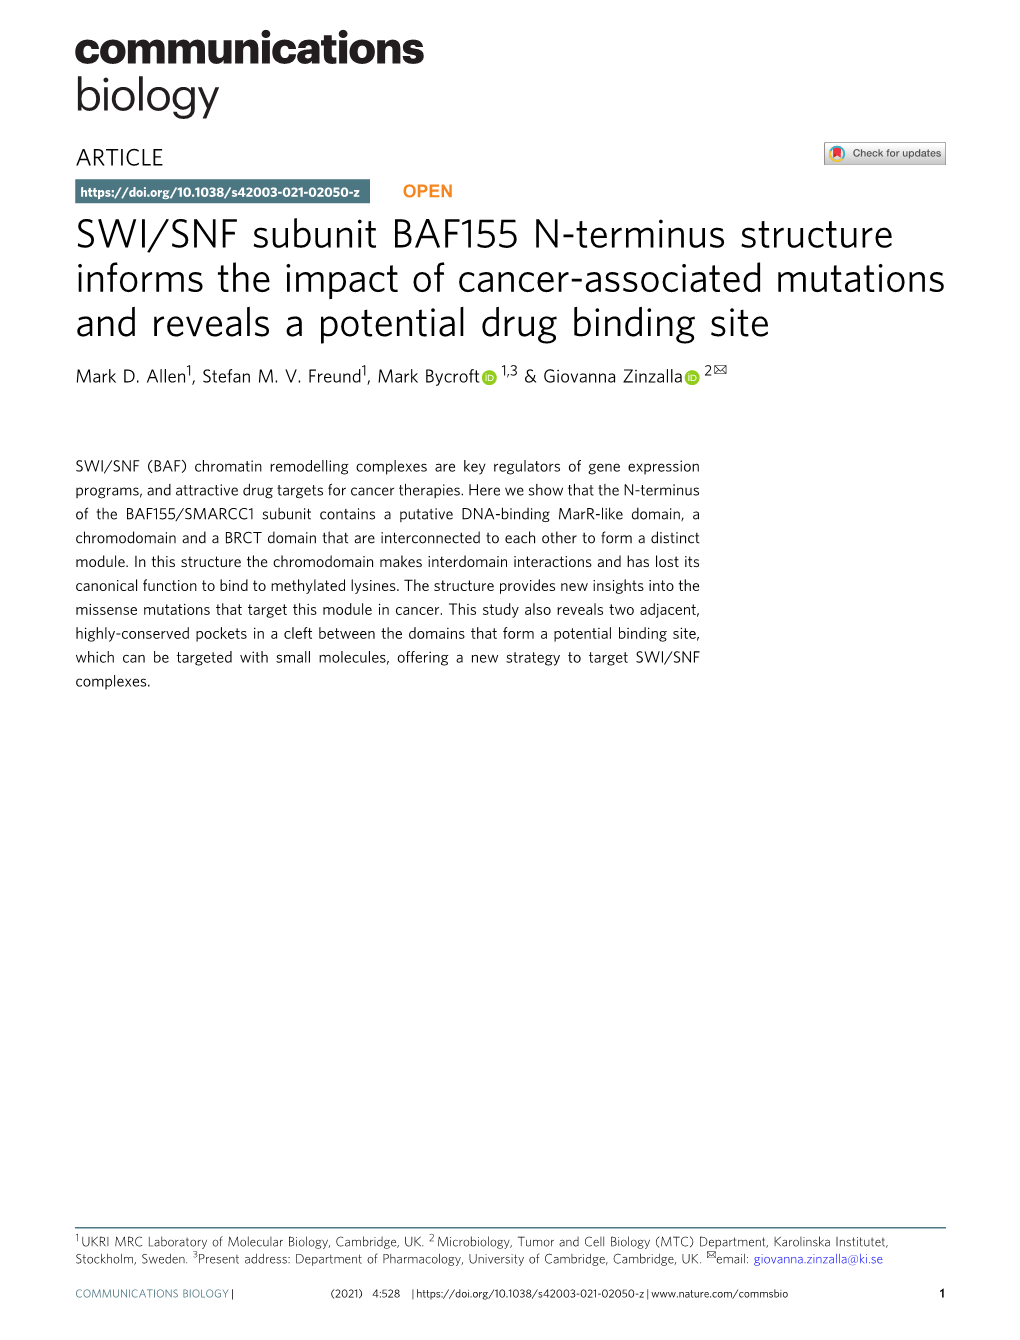 SWI/SNF Subunit BAF155 N-Terminus Structure Informs the Impact of Cancer-Associated Mutations and Reveals a Potential Drug Binding Site ✉ Mark D